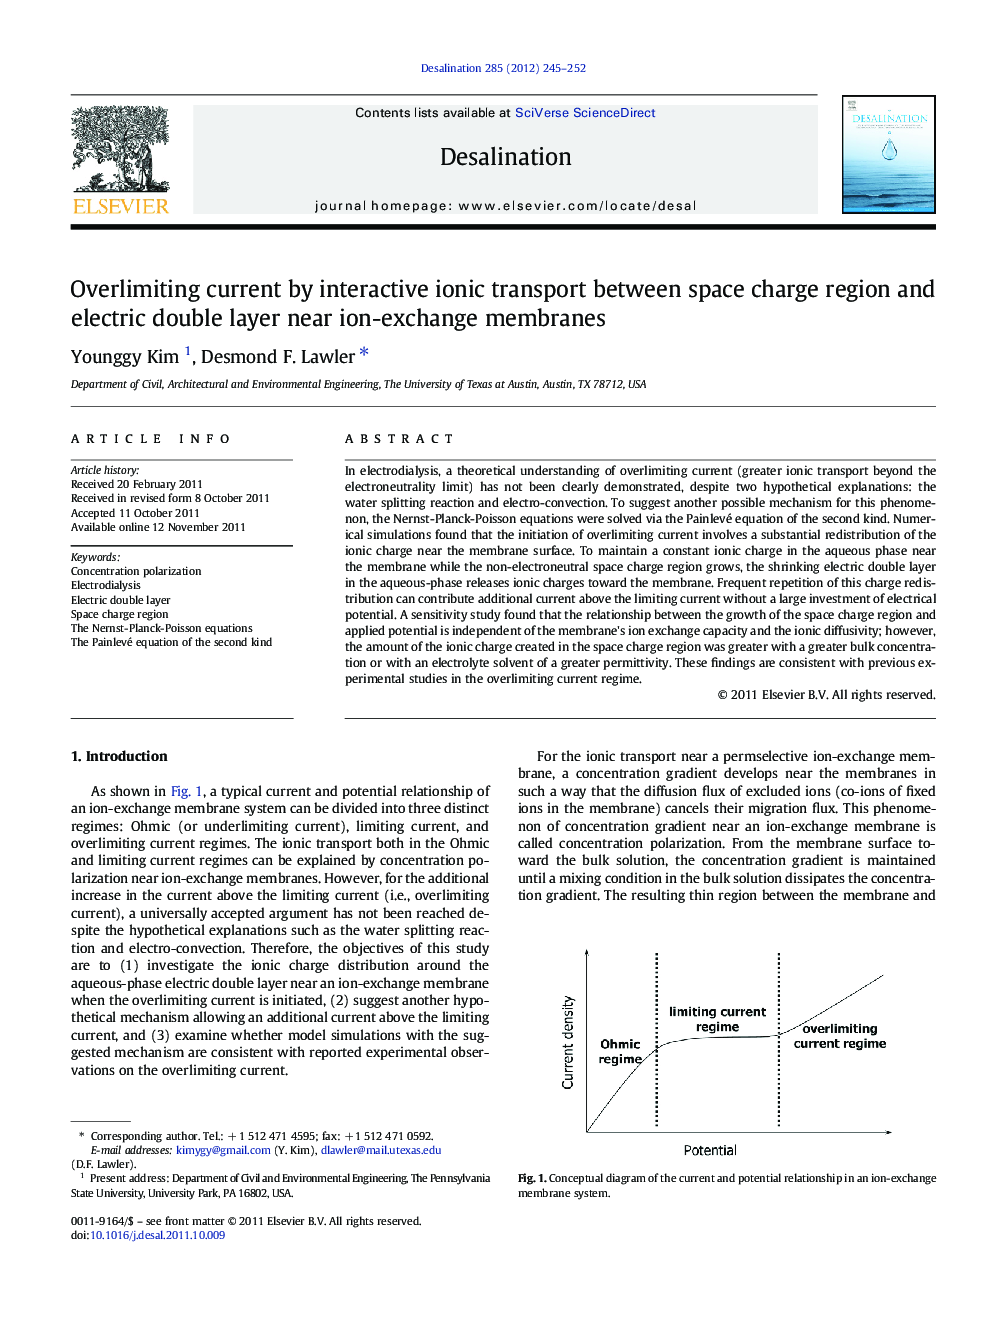 Overlimiting current by interactive ionic transport between space charge region and electric double layer near ion-exchange membranes